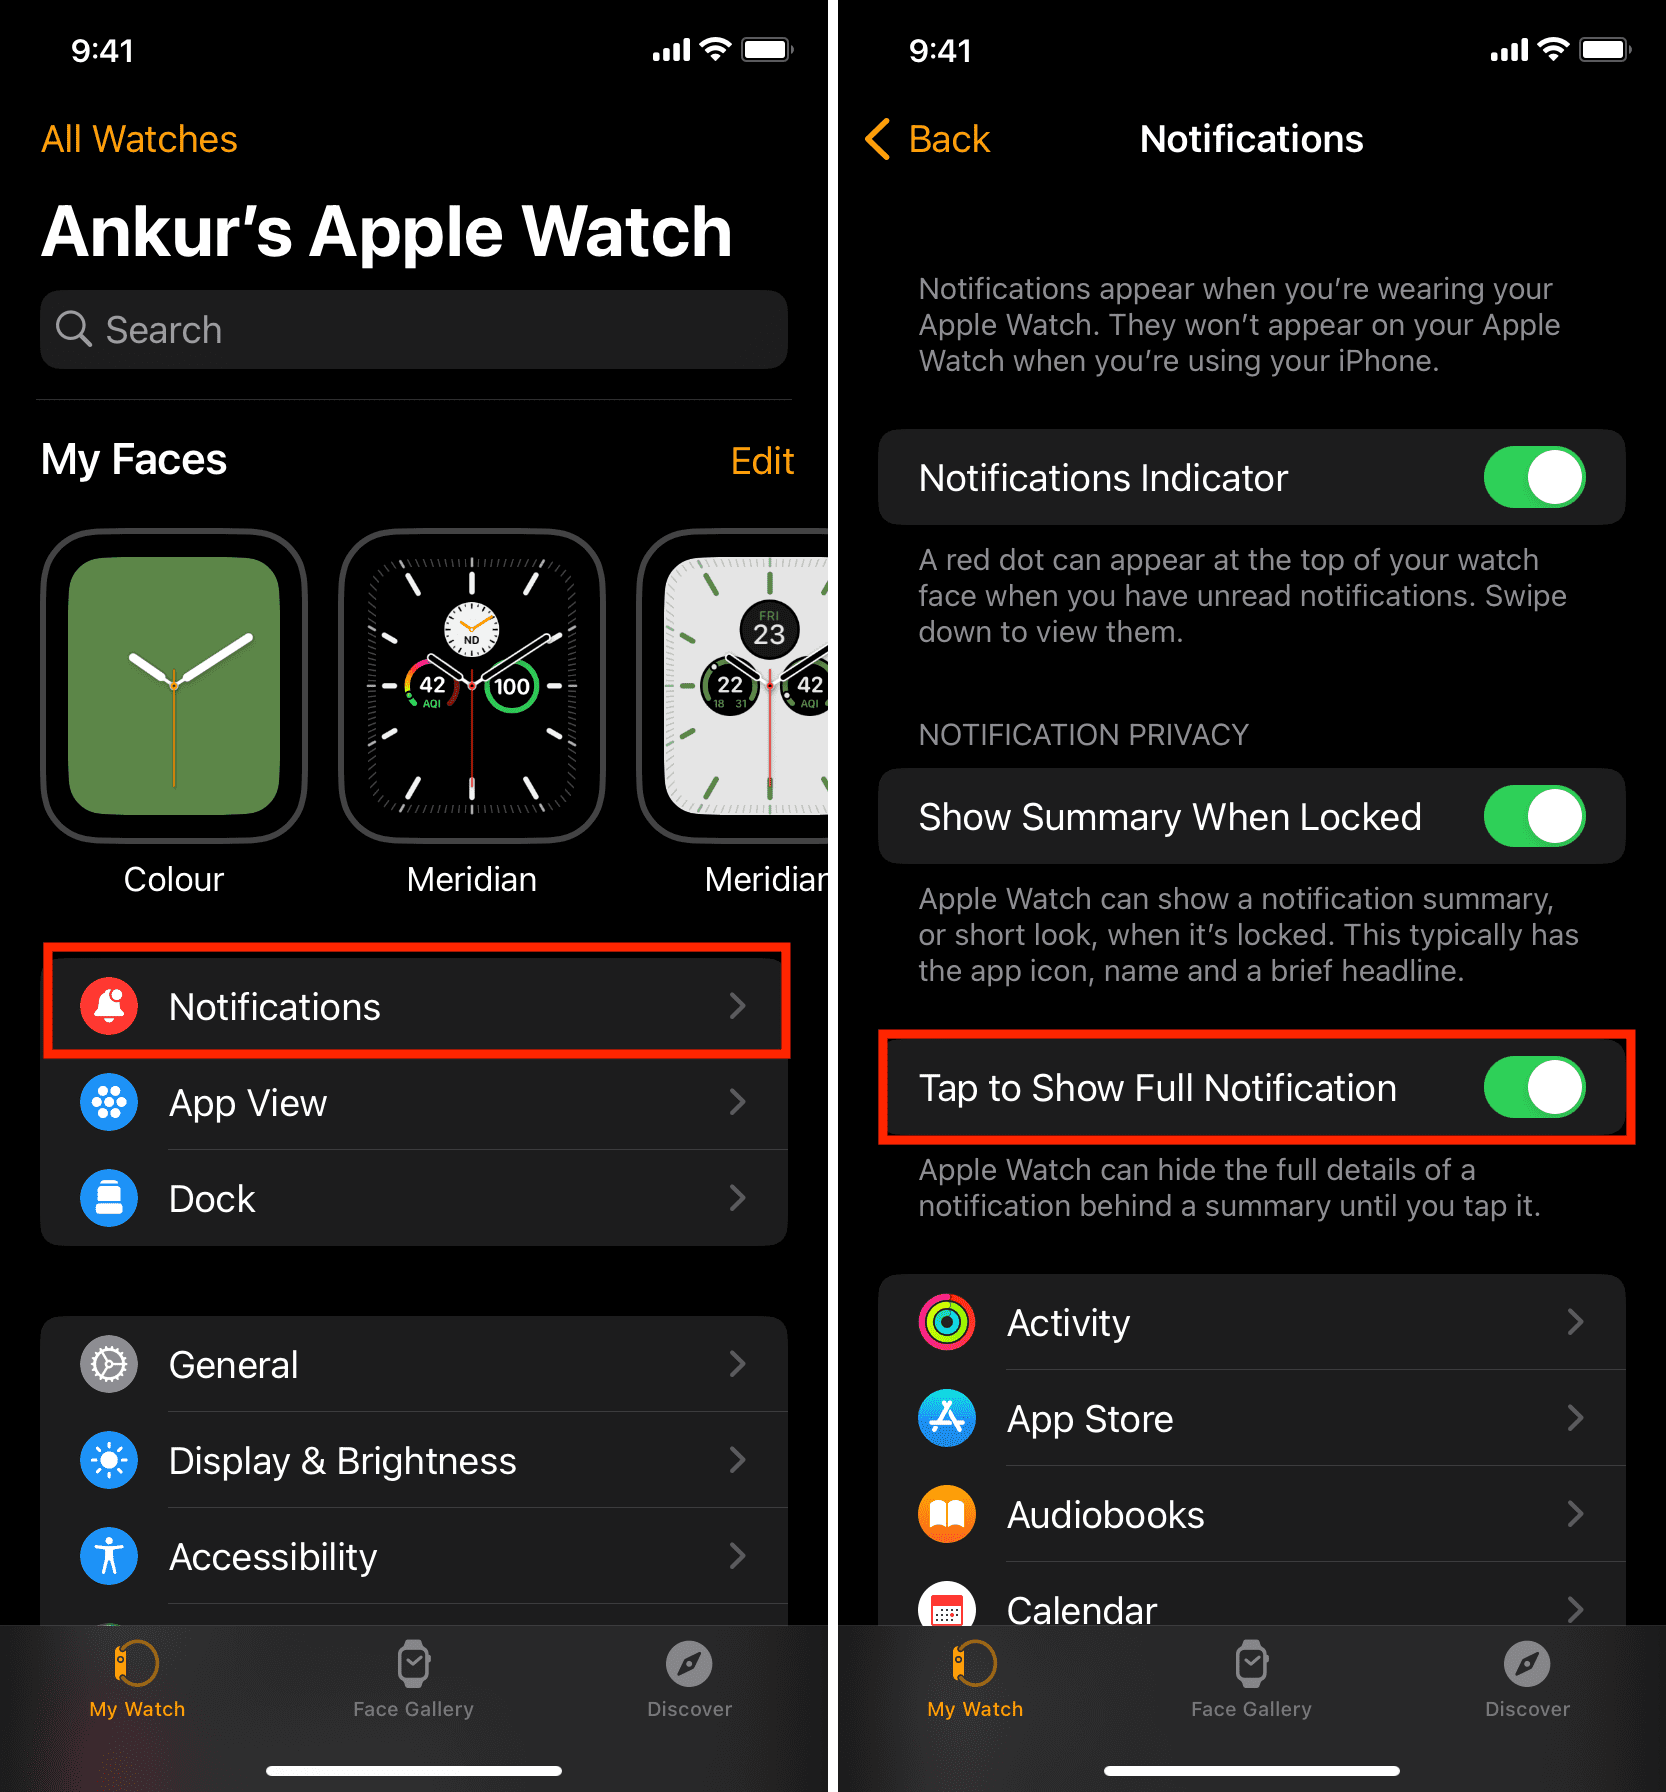 Enable Tap to Show Full Notification in Watch app